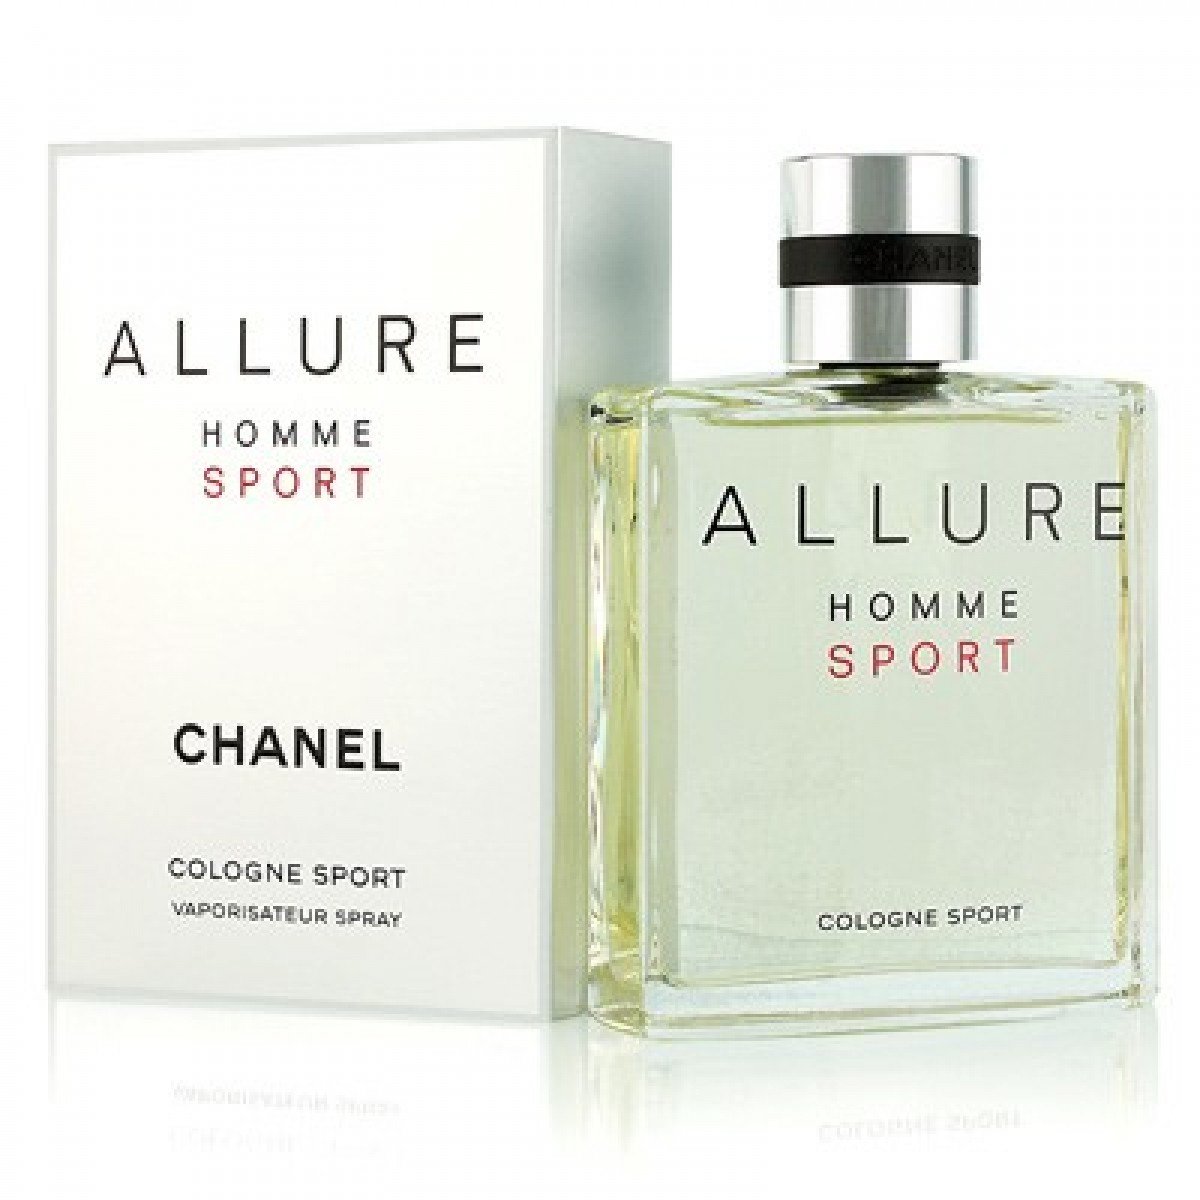 Chanel Allure Homme Sport Cologne Spray 150ml - Masculine